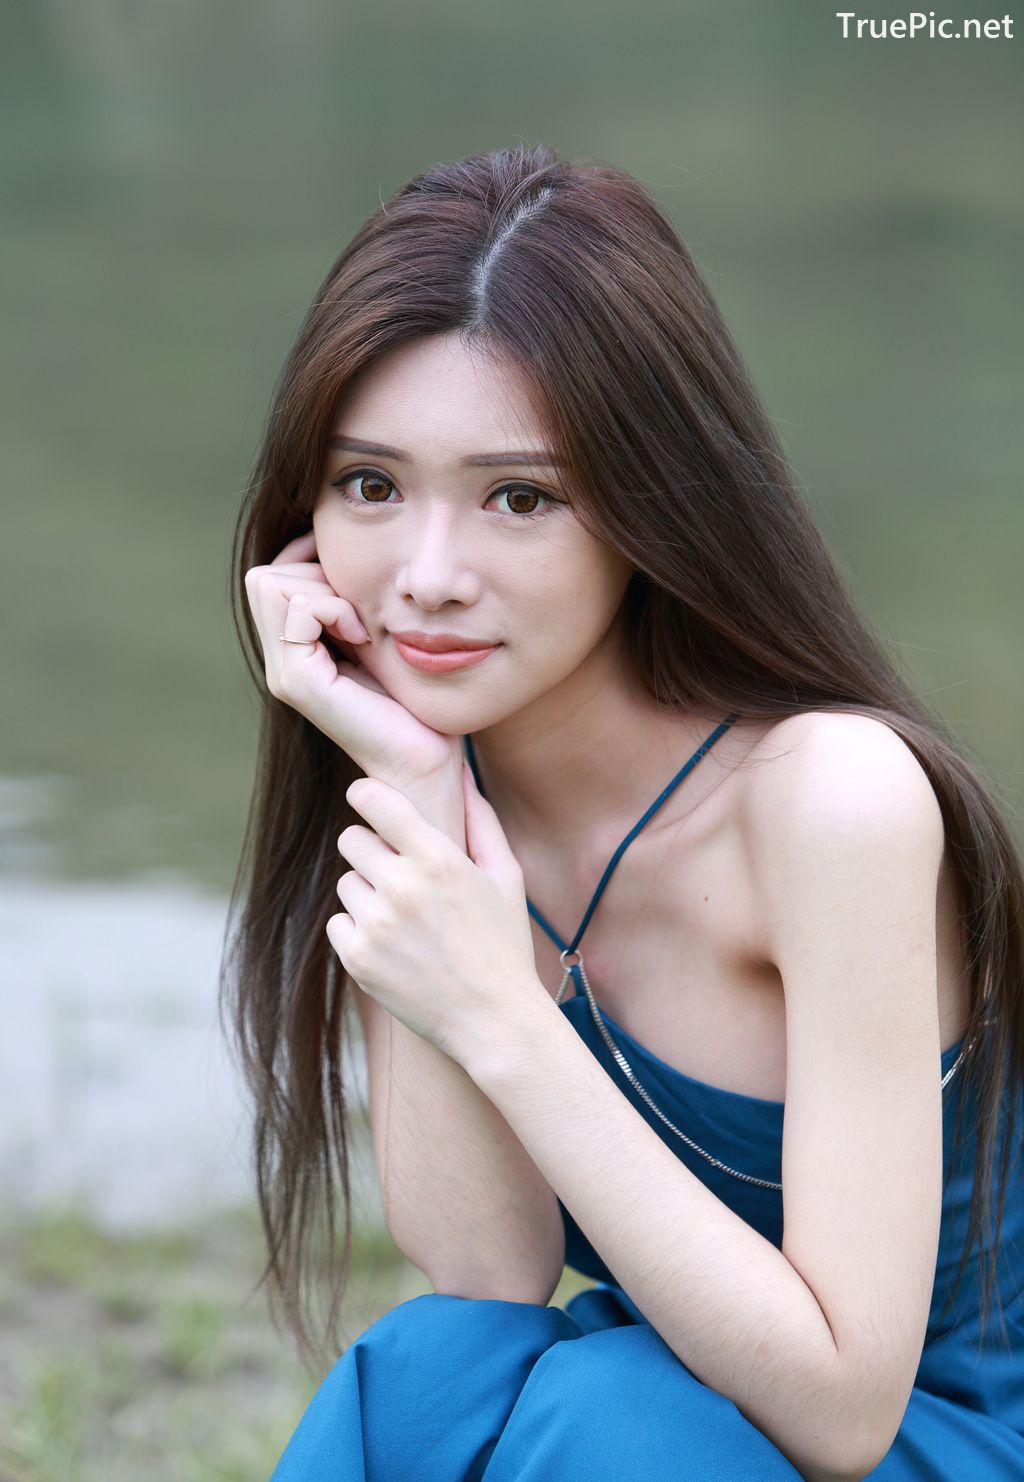 Image-Taiwanese-Pure-Girl-承容-Young-Beautiful-And-Lovely-TruePic.net- Picture-82